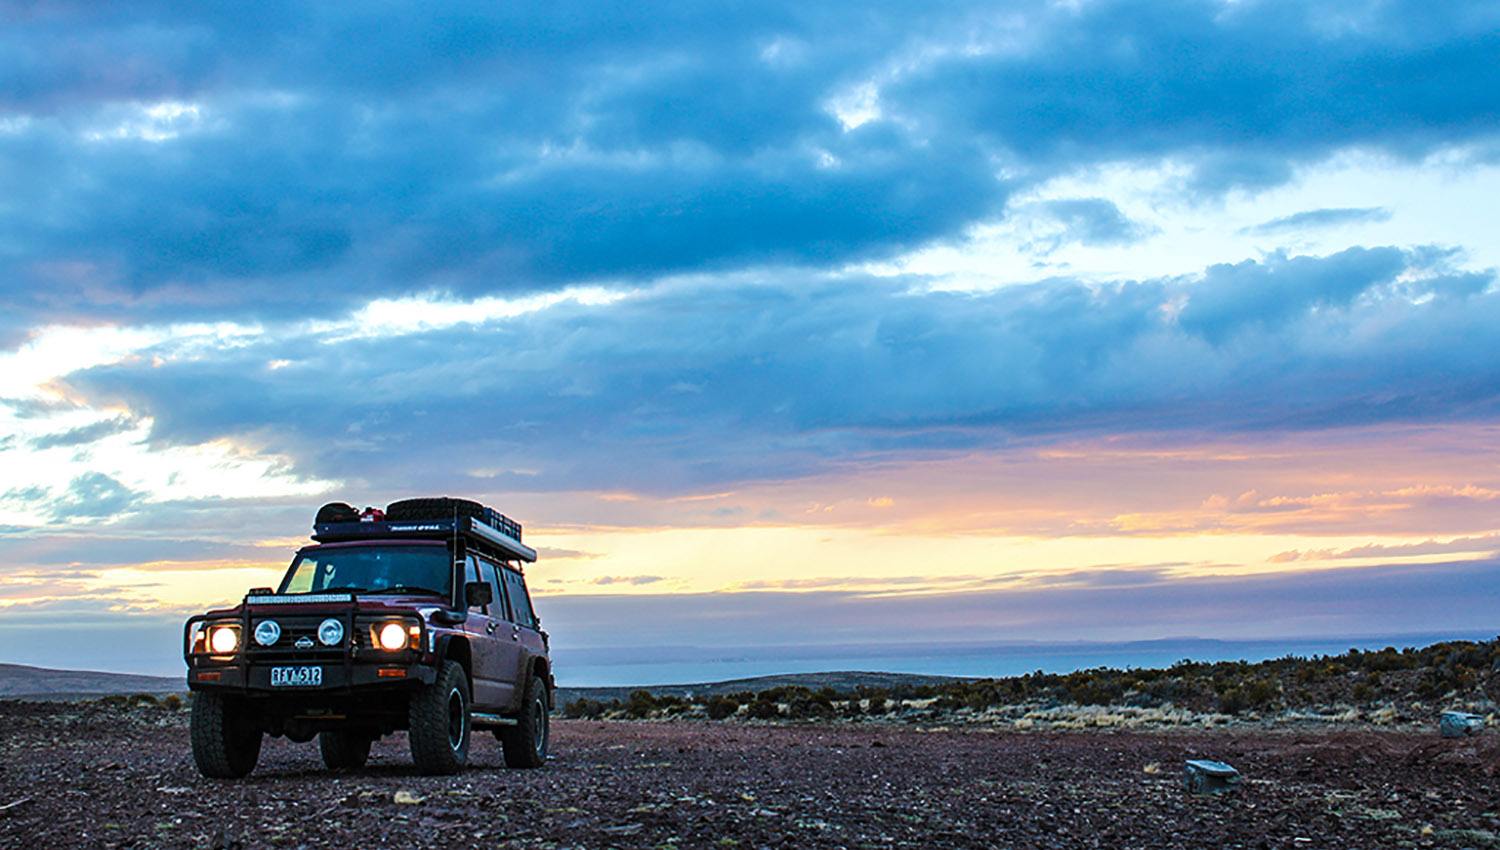 Nissan Patrol with Tradesman Oval Alloy roof rack in Argentina on a rocky plain with sunset in background.